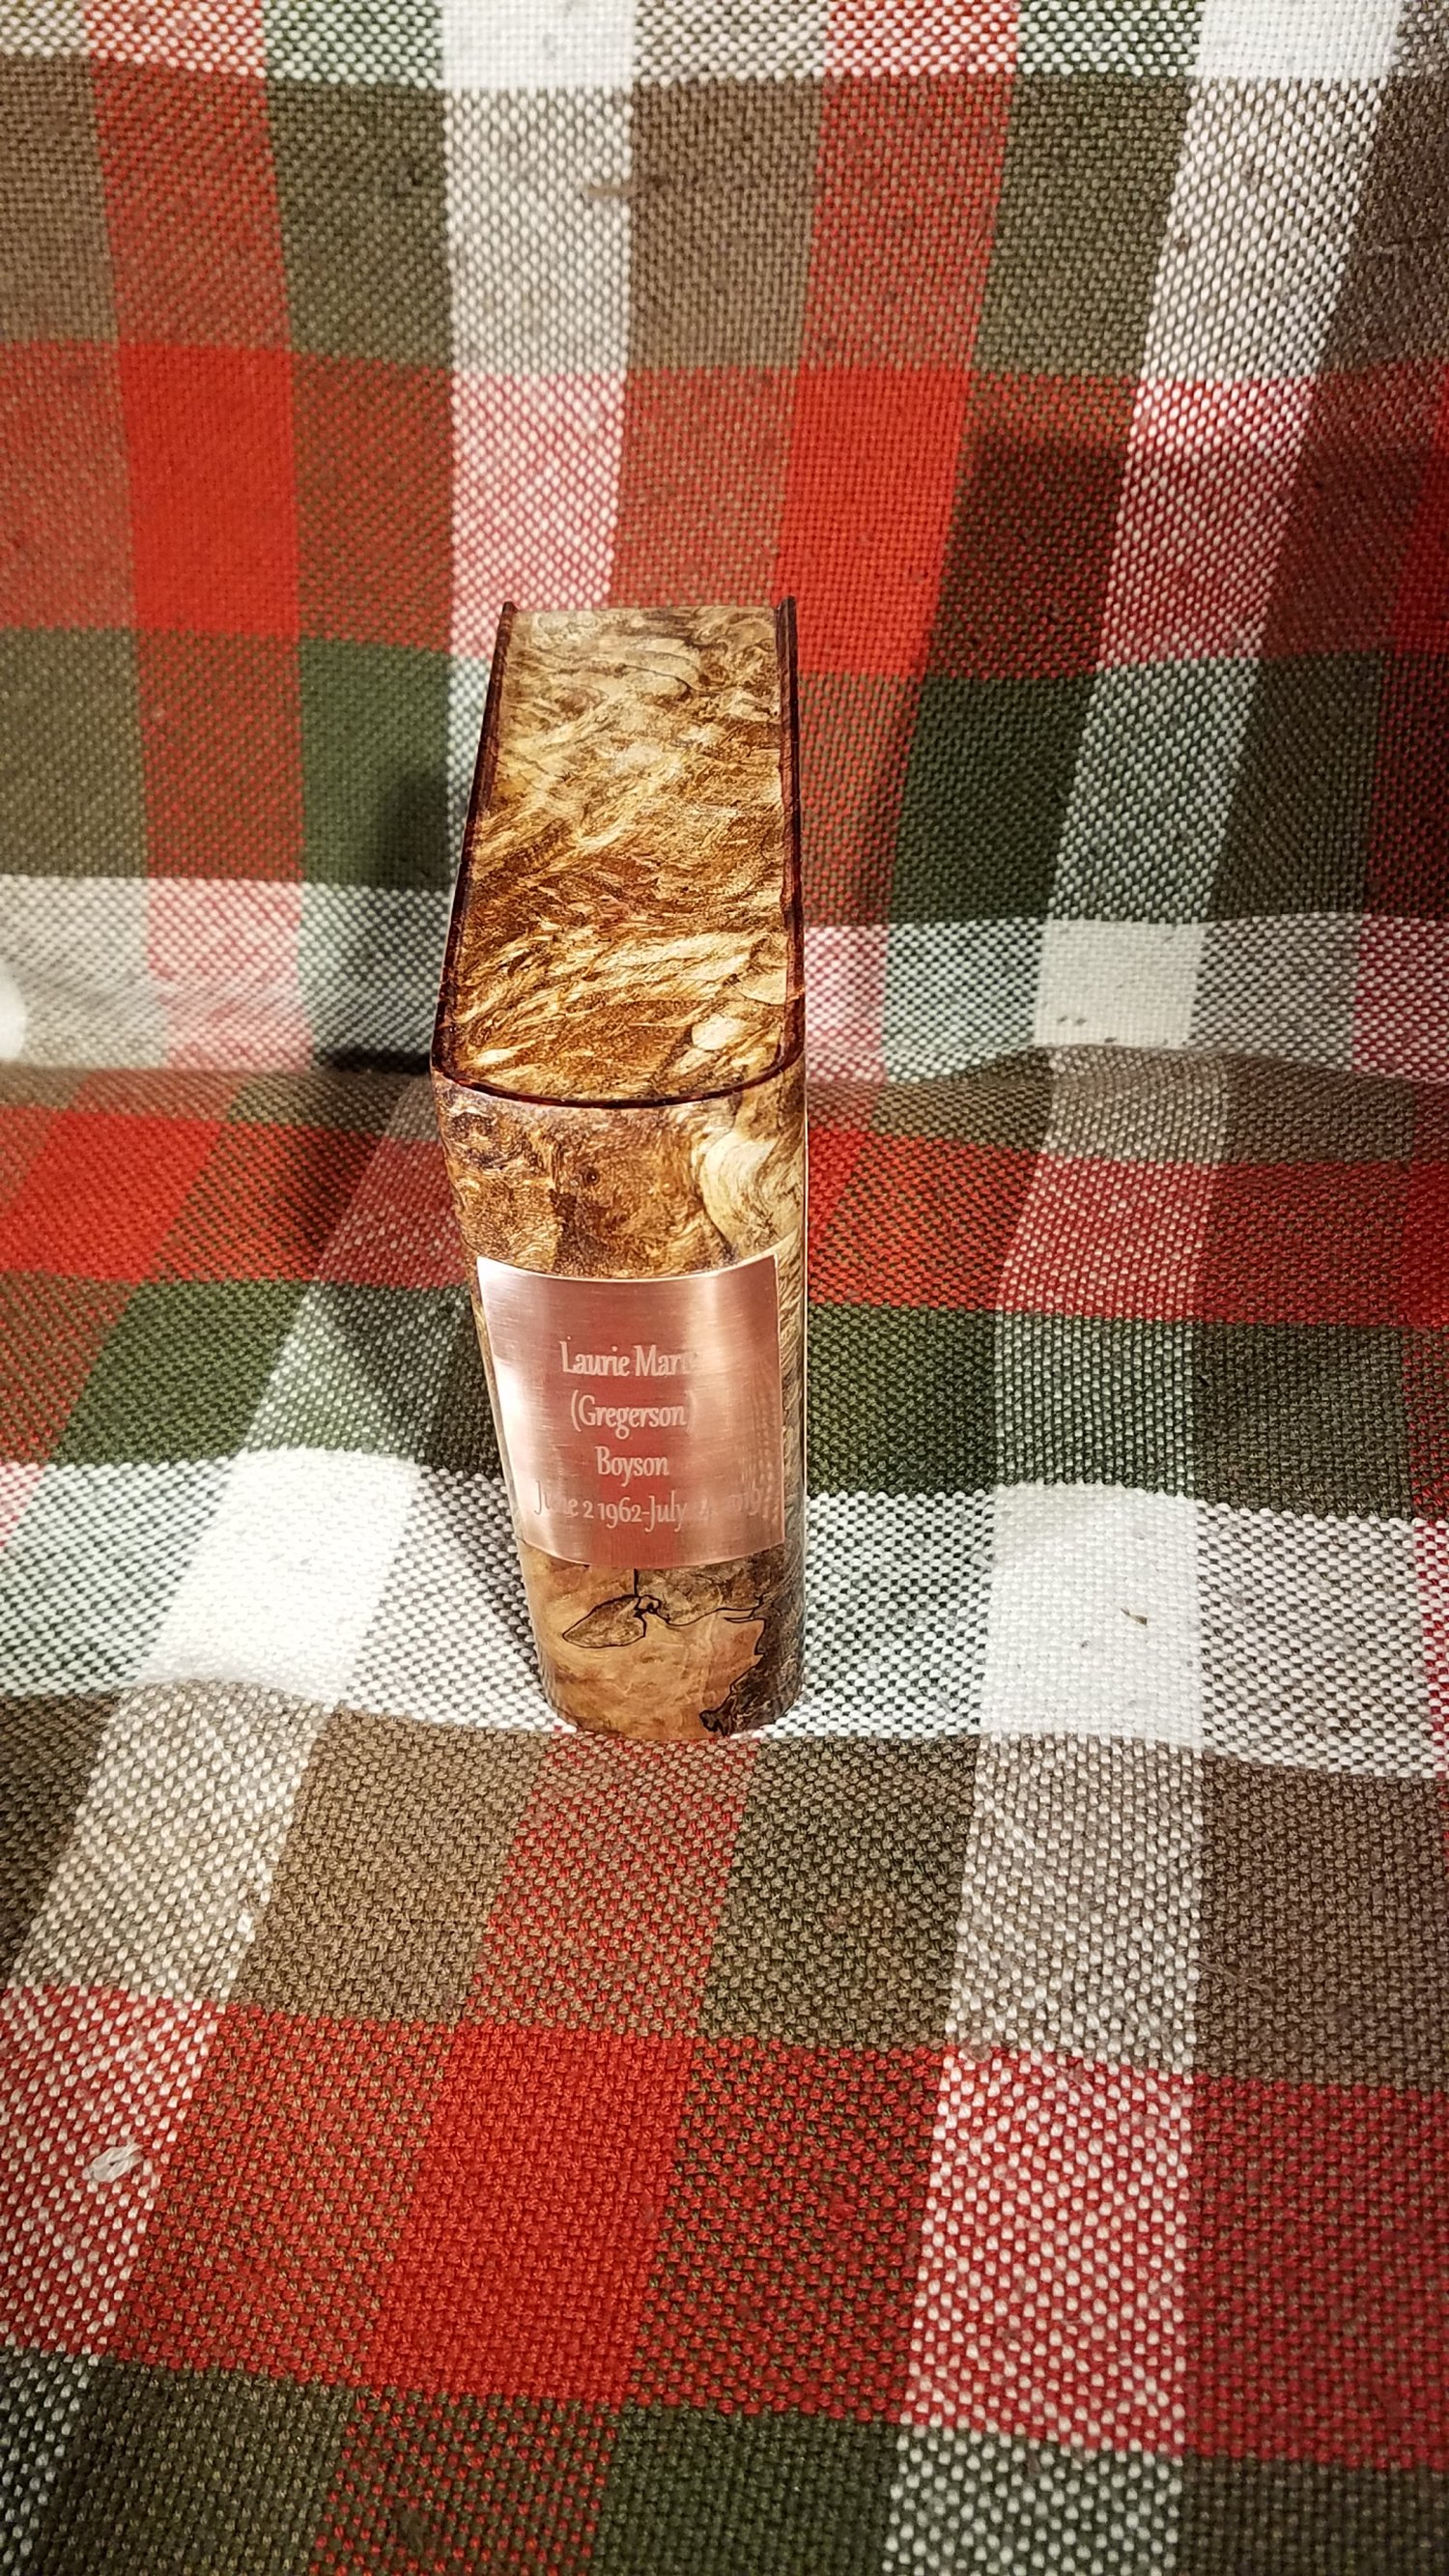  Book shaped Funeral Urn, Spalted Maple Burl, stabalized, engraved copper information plates, spine view. 